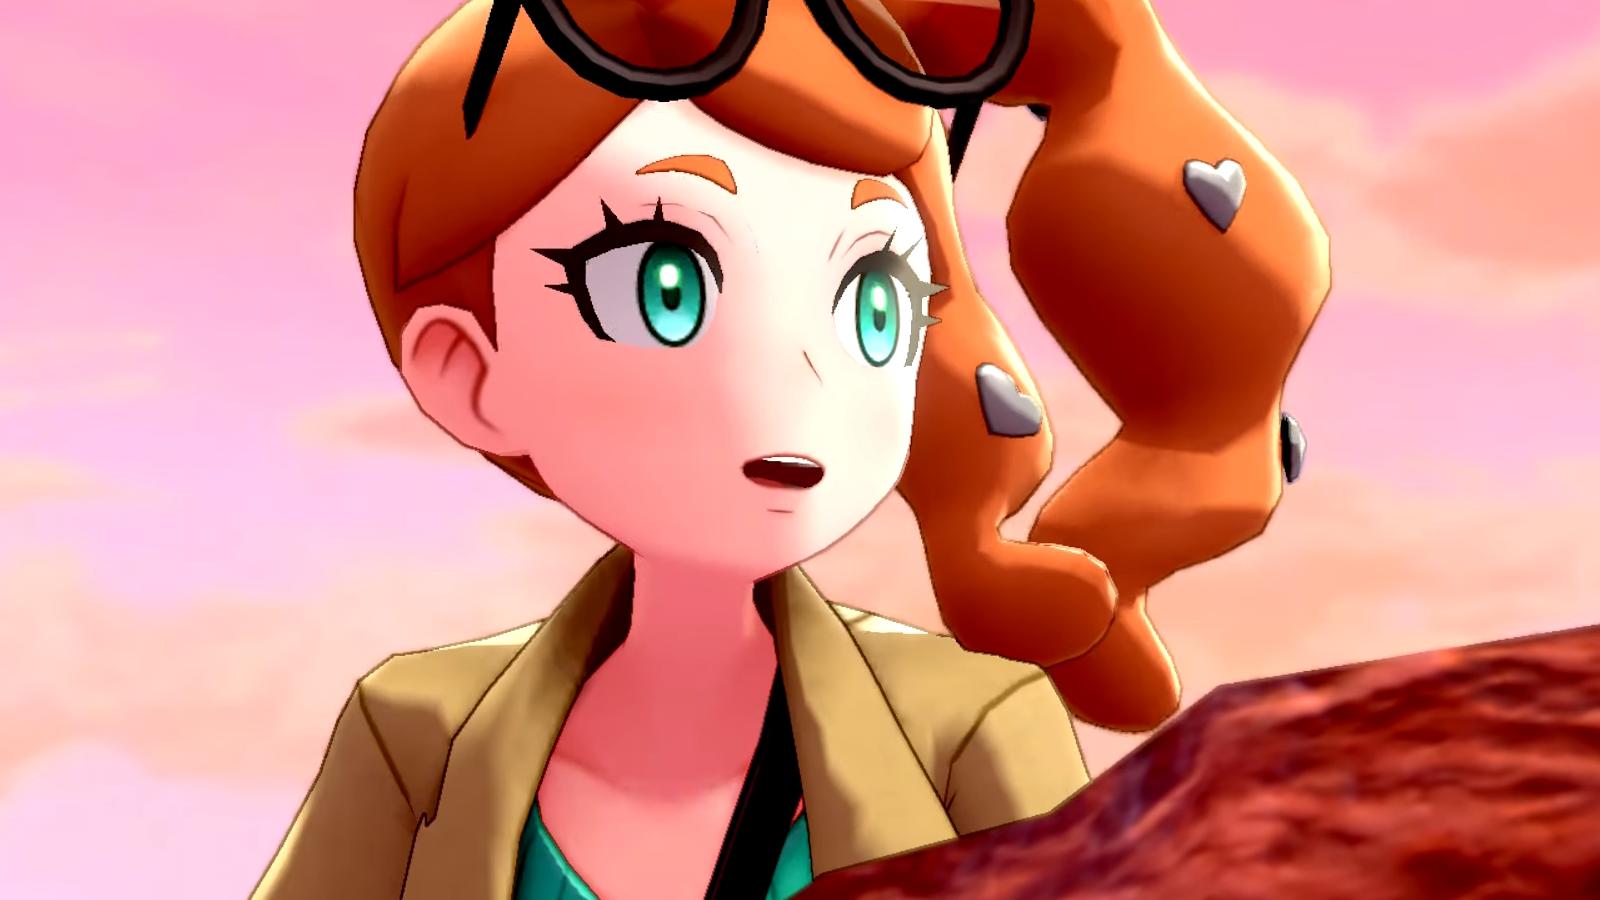 professor sonia looking at destoyed mural as seen in pokemon sword and shield.